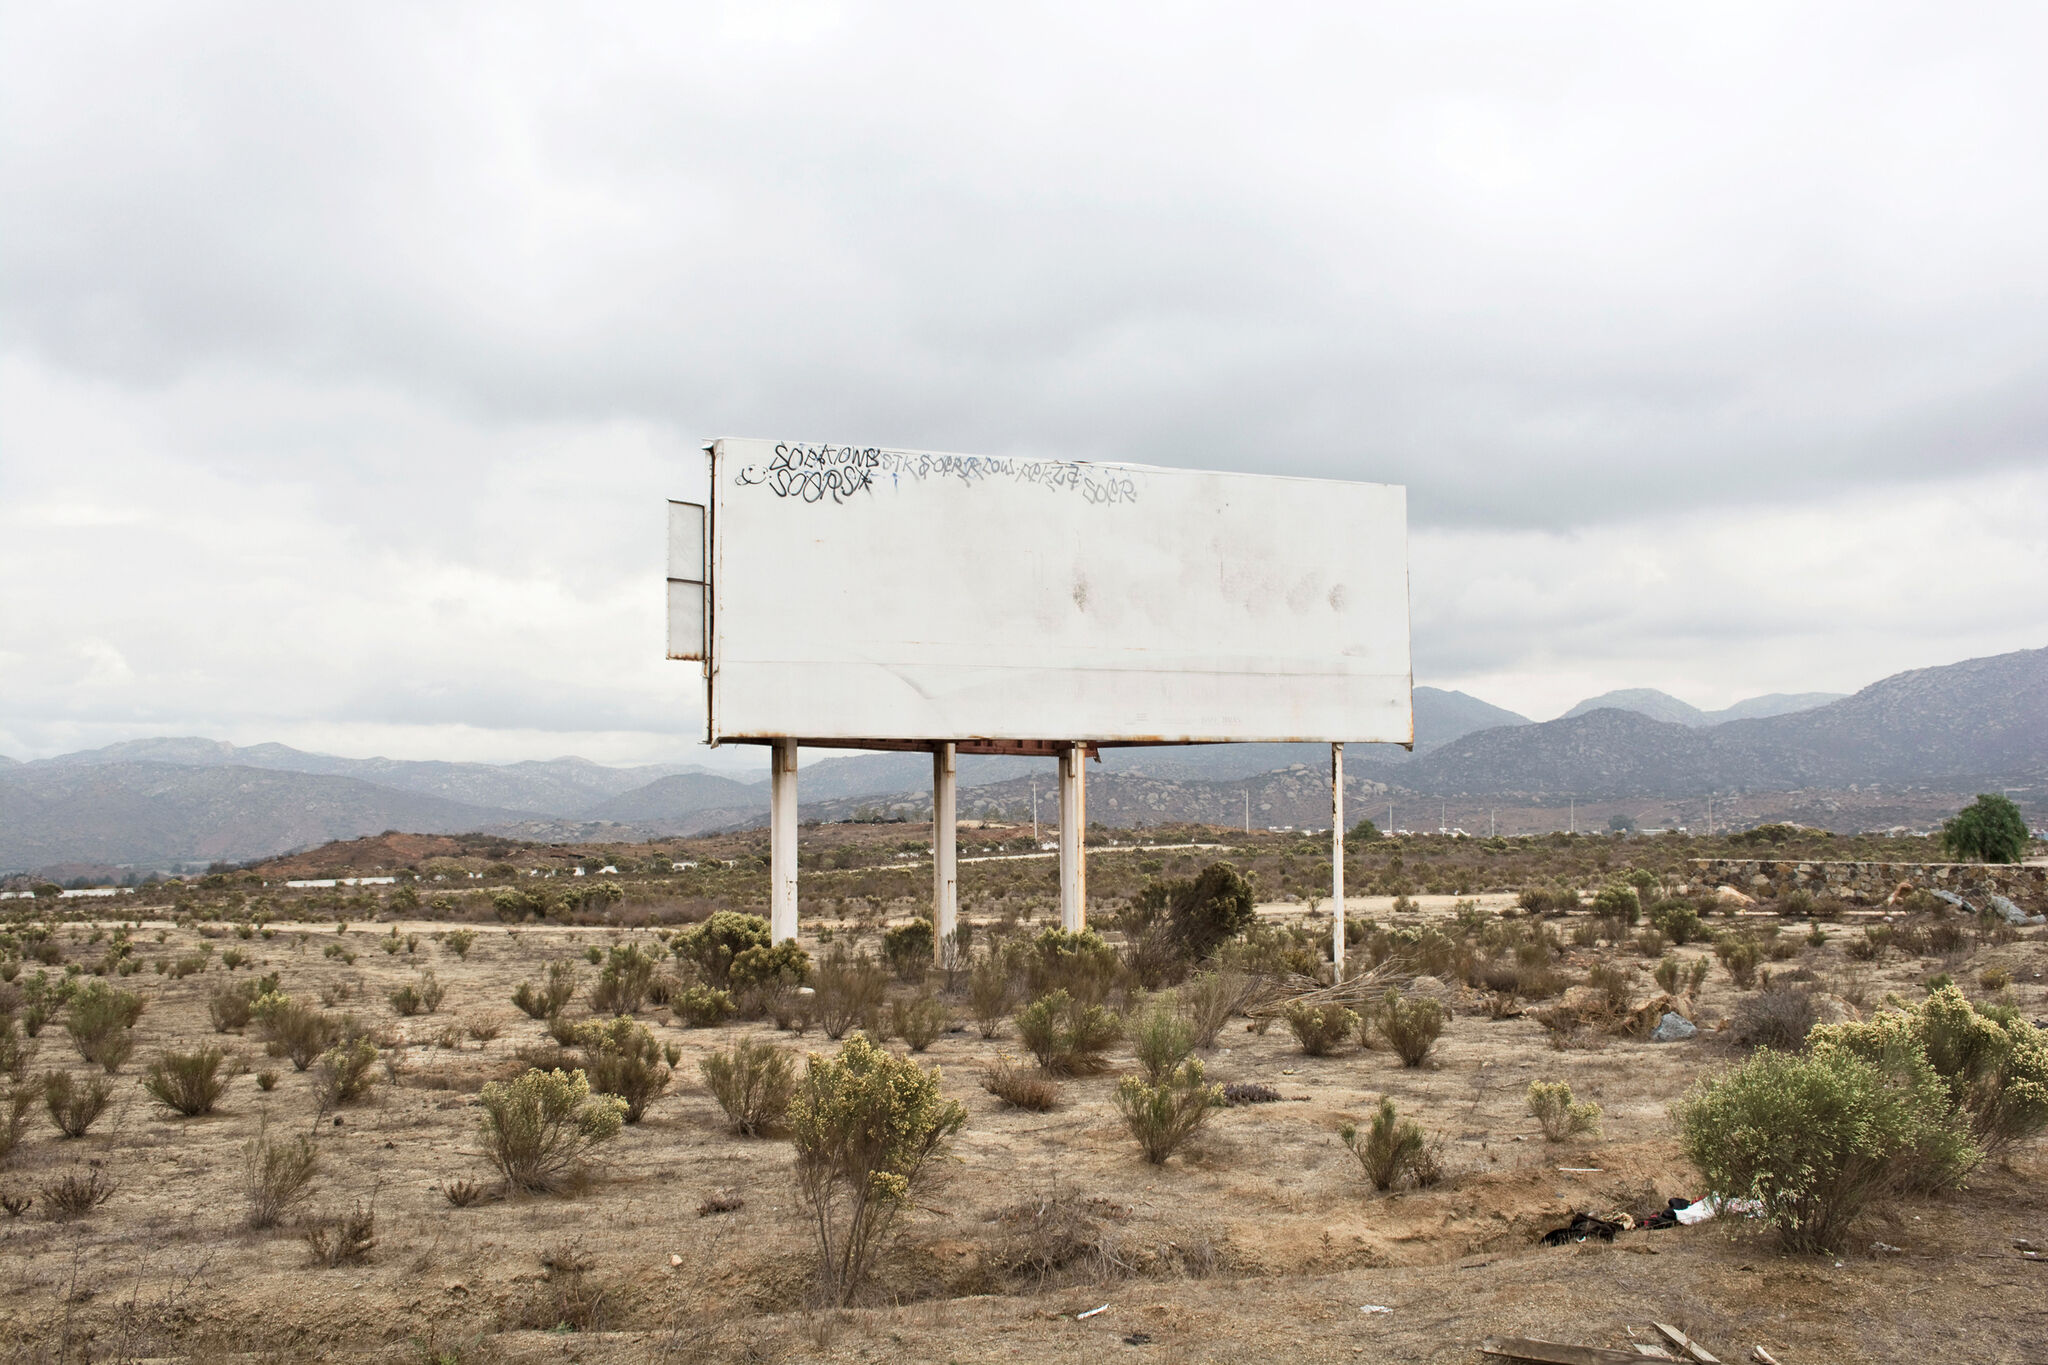 Photograph of a blank, white billboard with some graffiti in its upper left corner, set in a desert landscape with a gray sky and mountains in the background.